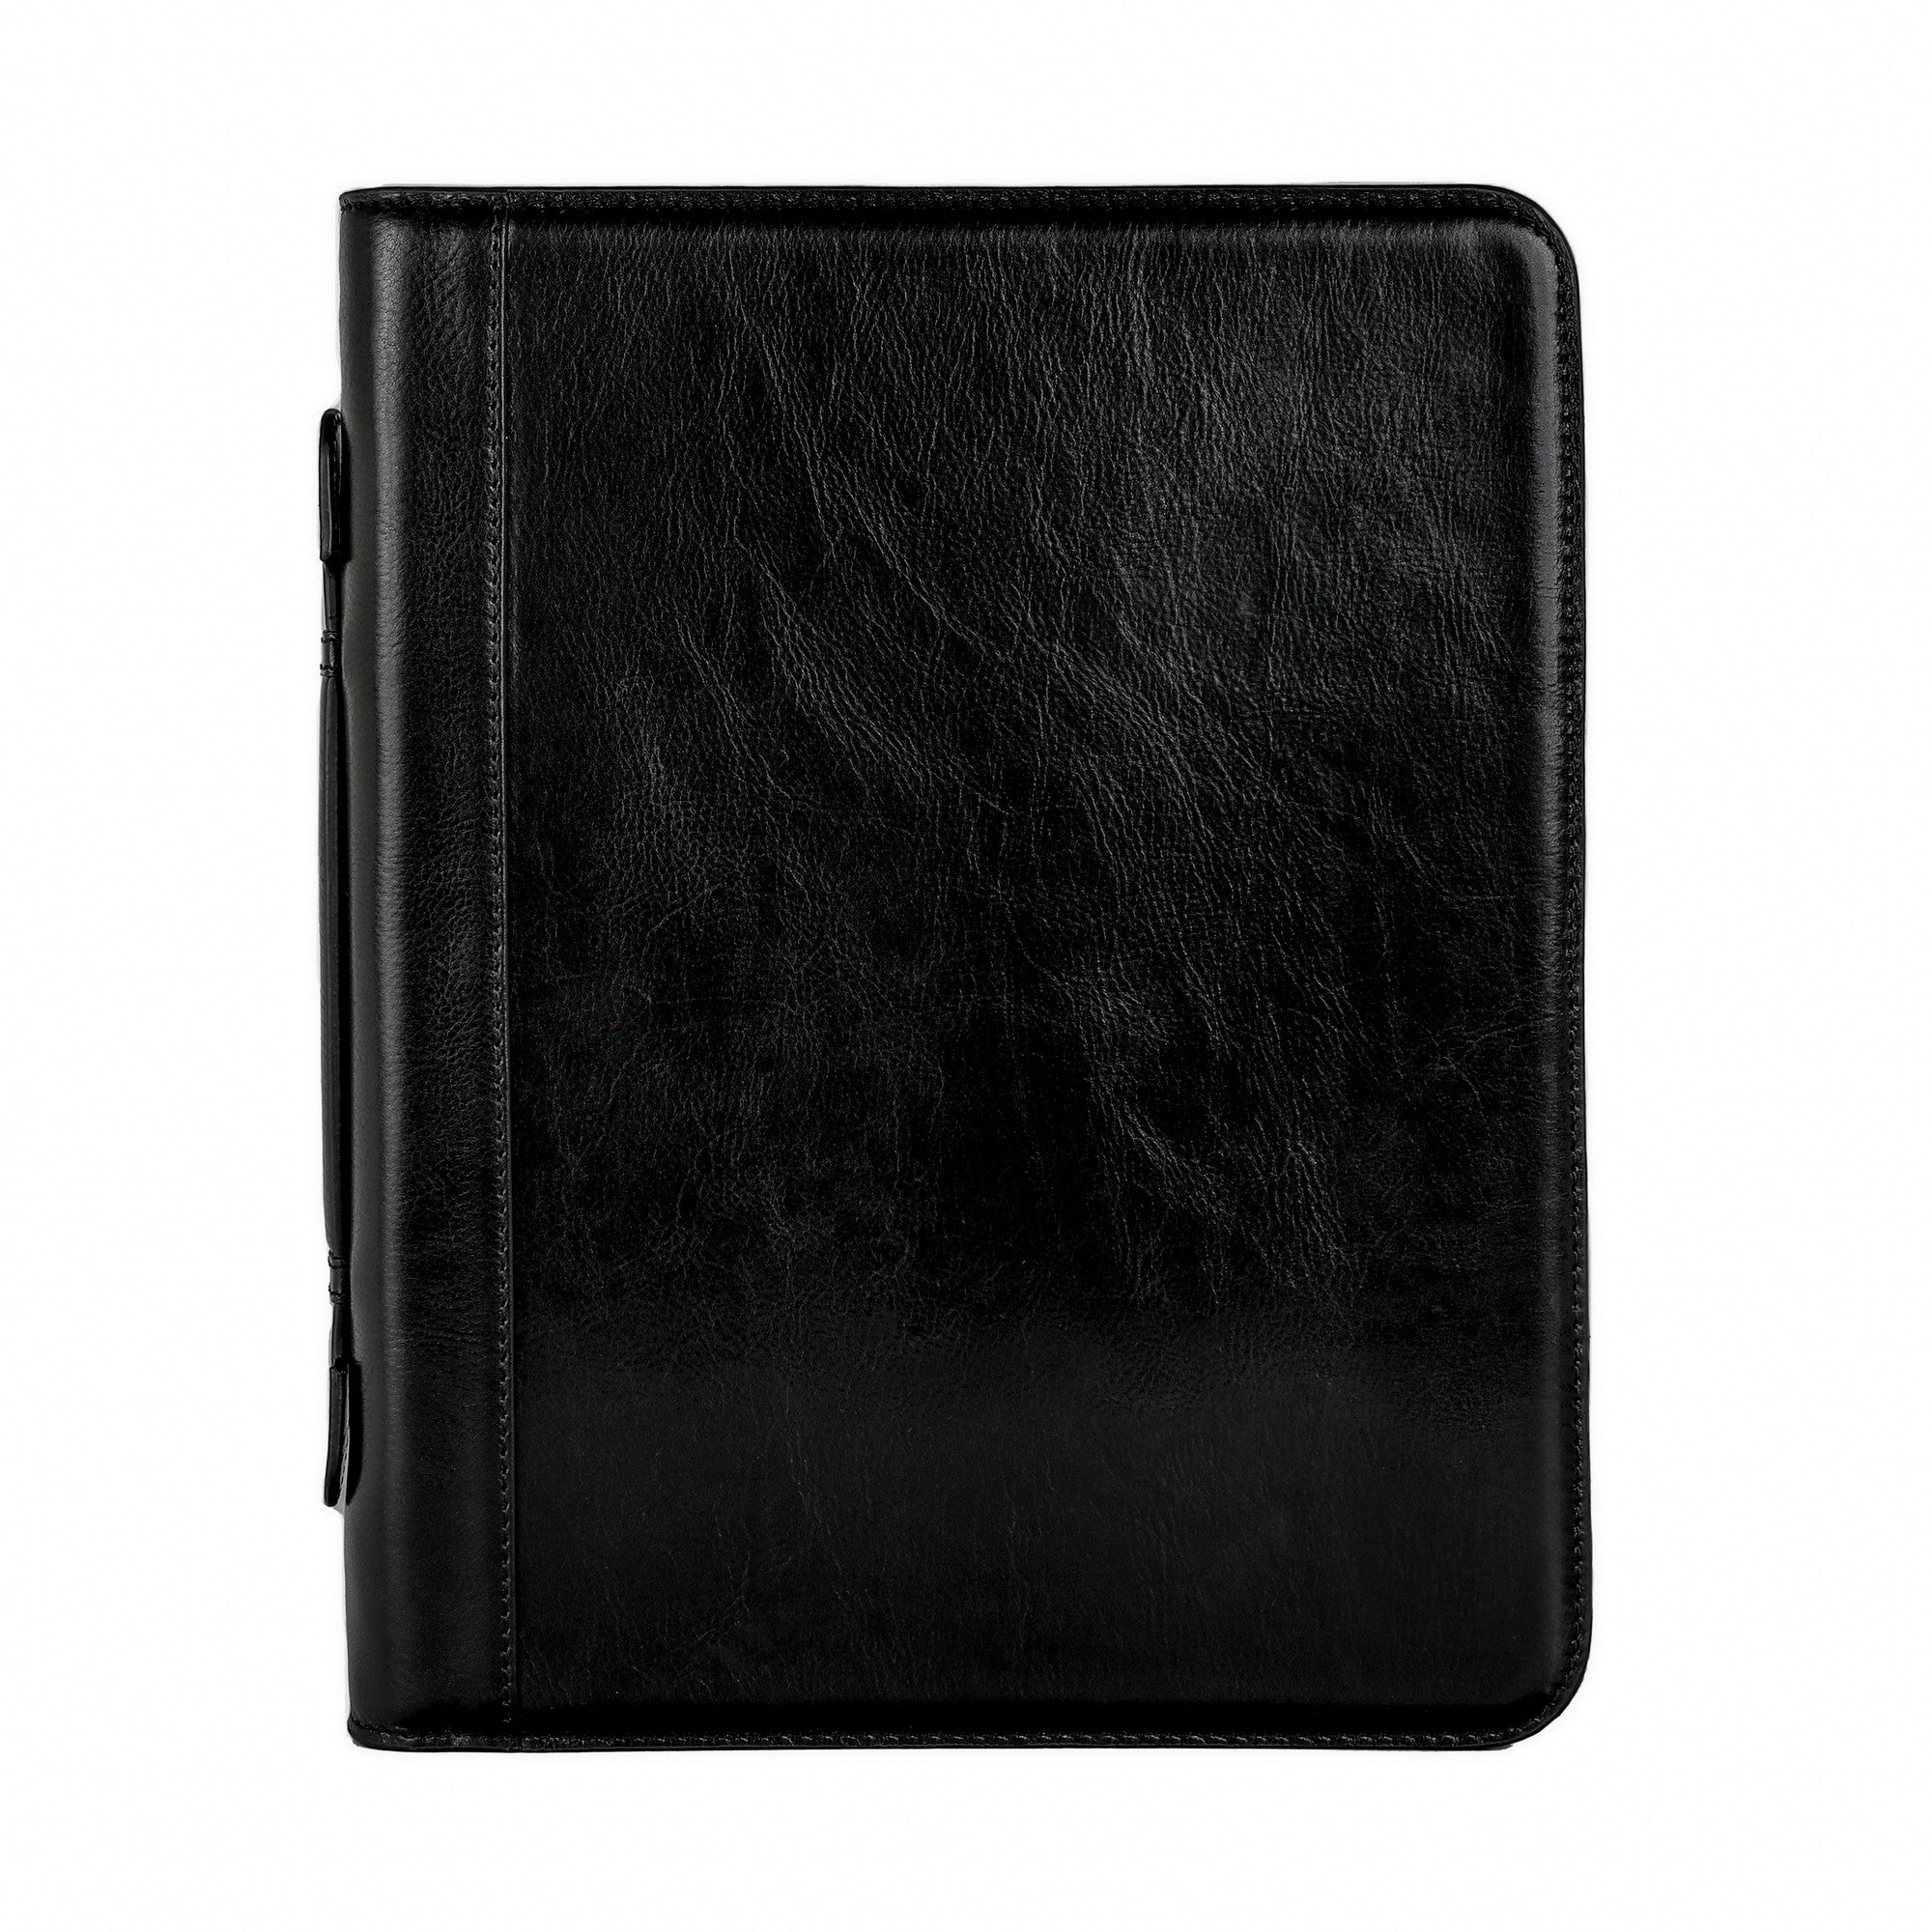 Leather Portfolio with Binder - Joy in the Morning